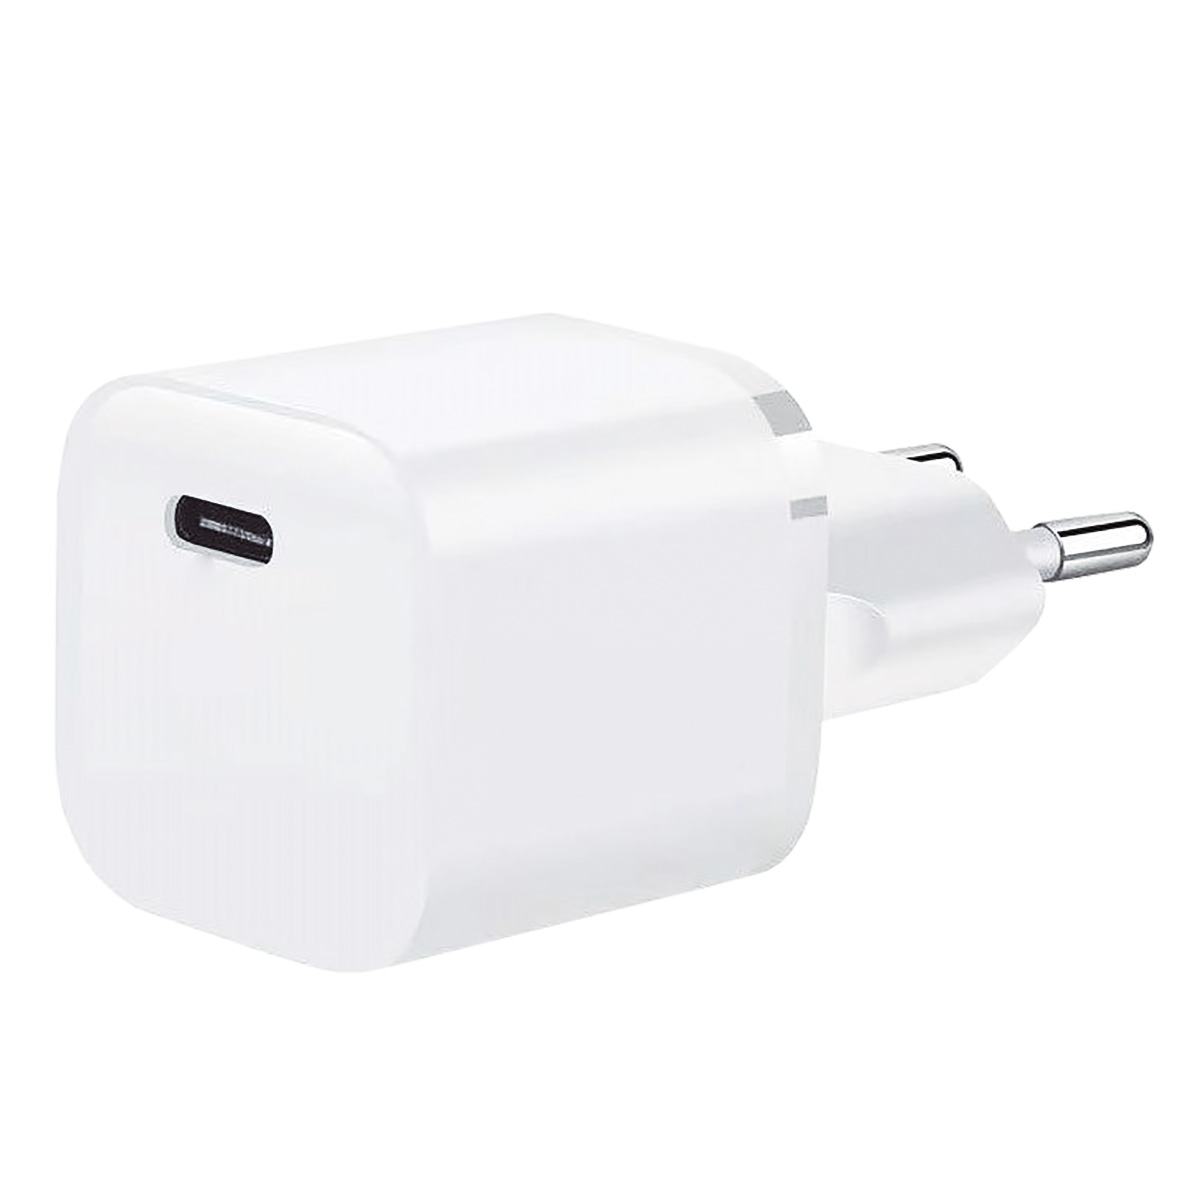 PD20W Wall Charger USB C